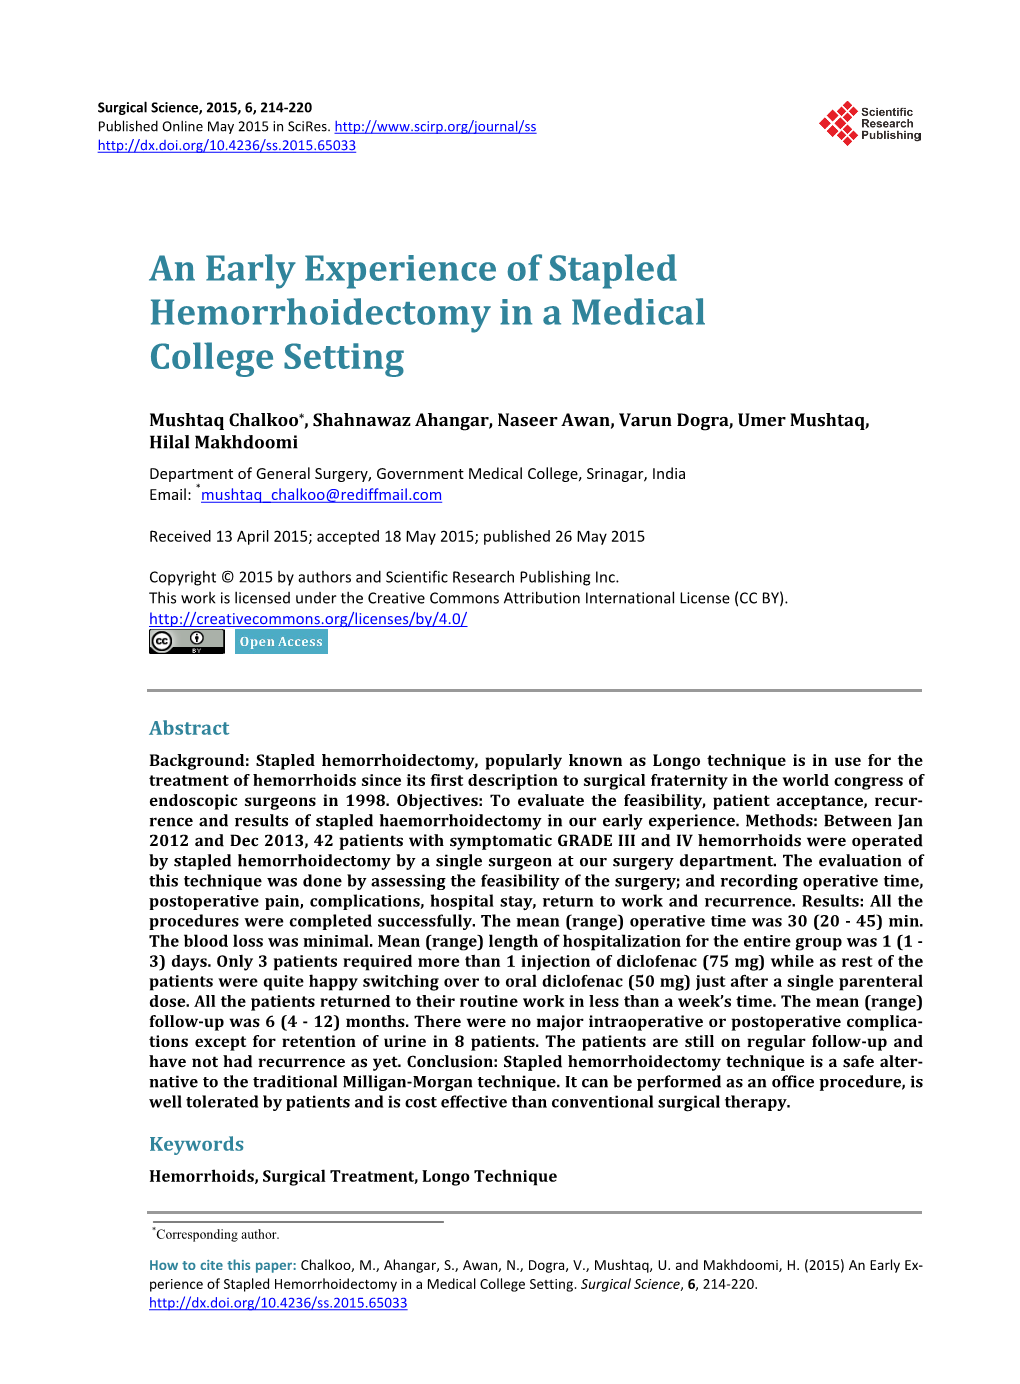 An Early Experience of Stapled Hemorrhoidectomy in a Medical College Setting